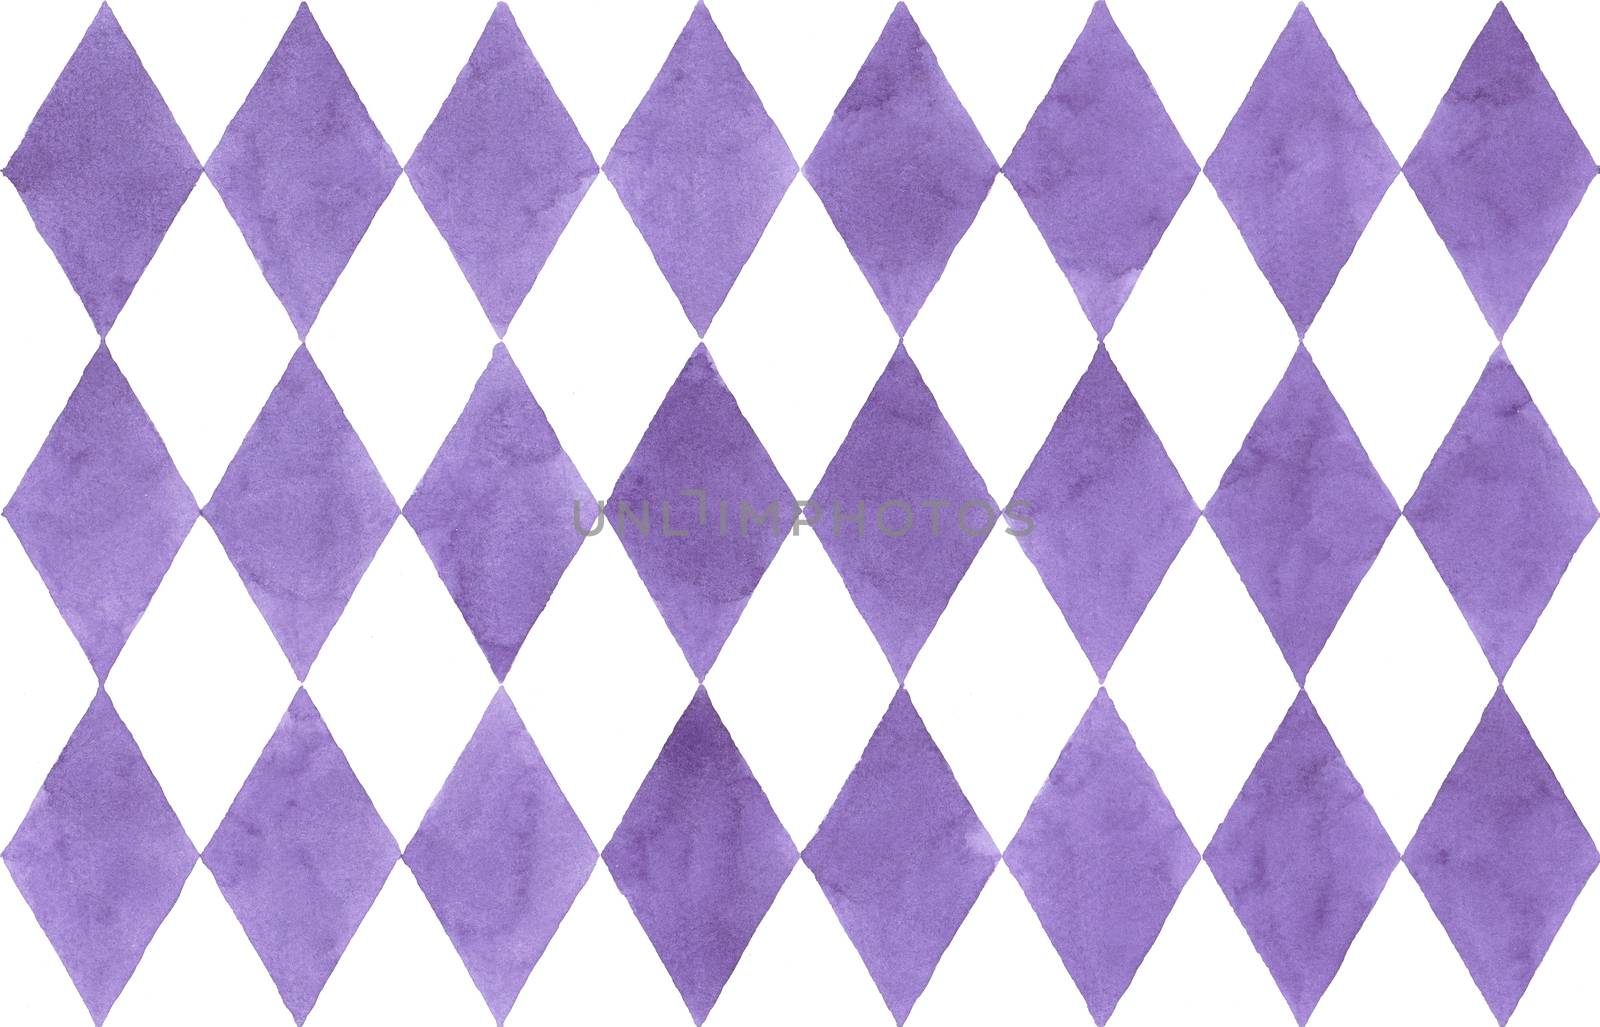 purple diamond-shaped quadrangle background, Watercolor hand painting, Halloween concept. by Ungamrung